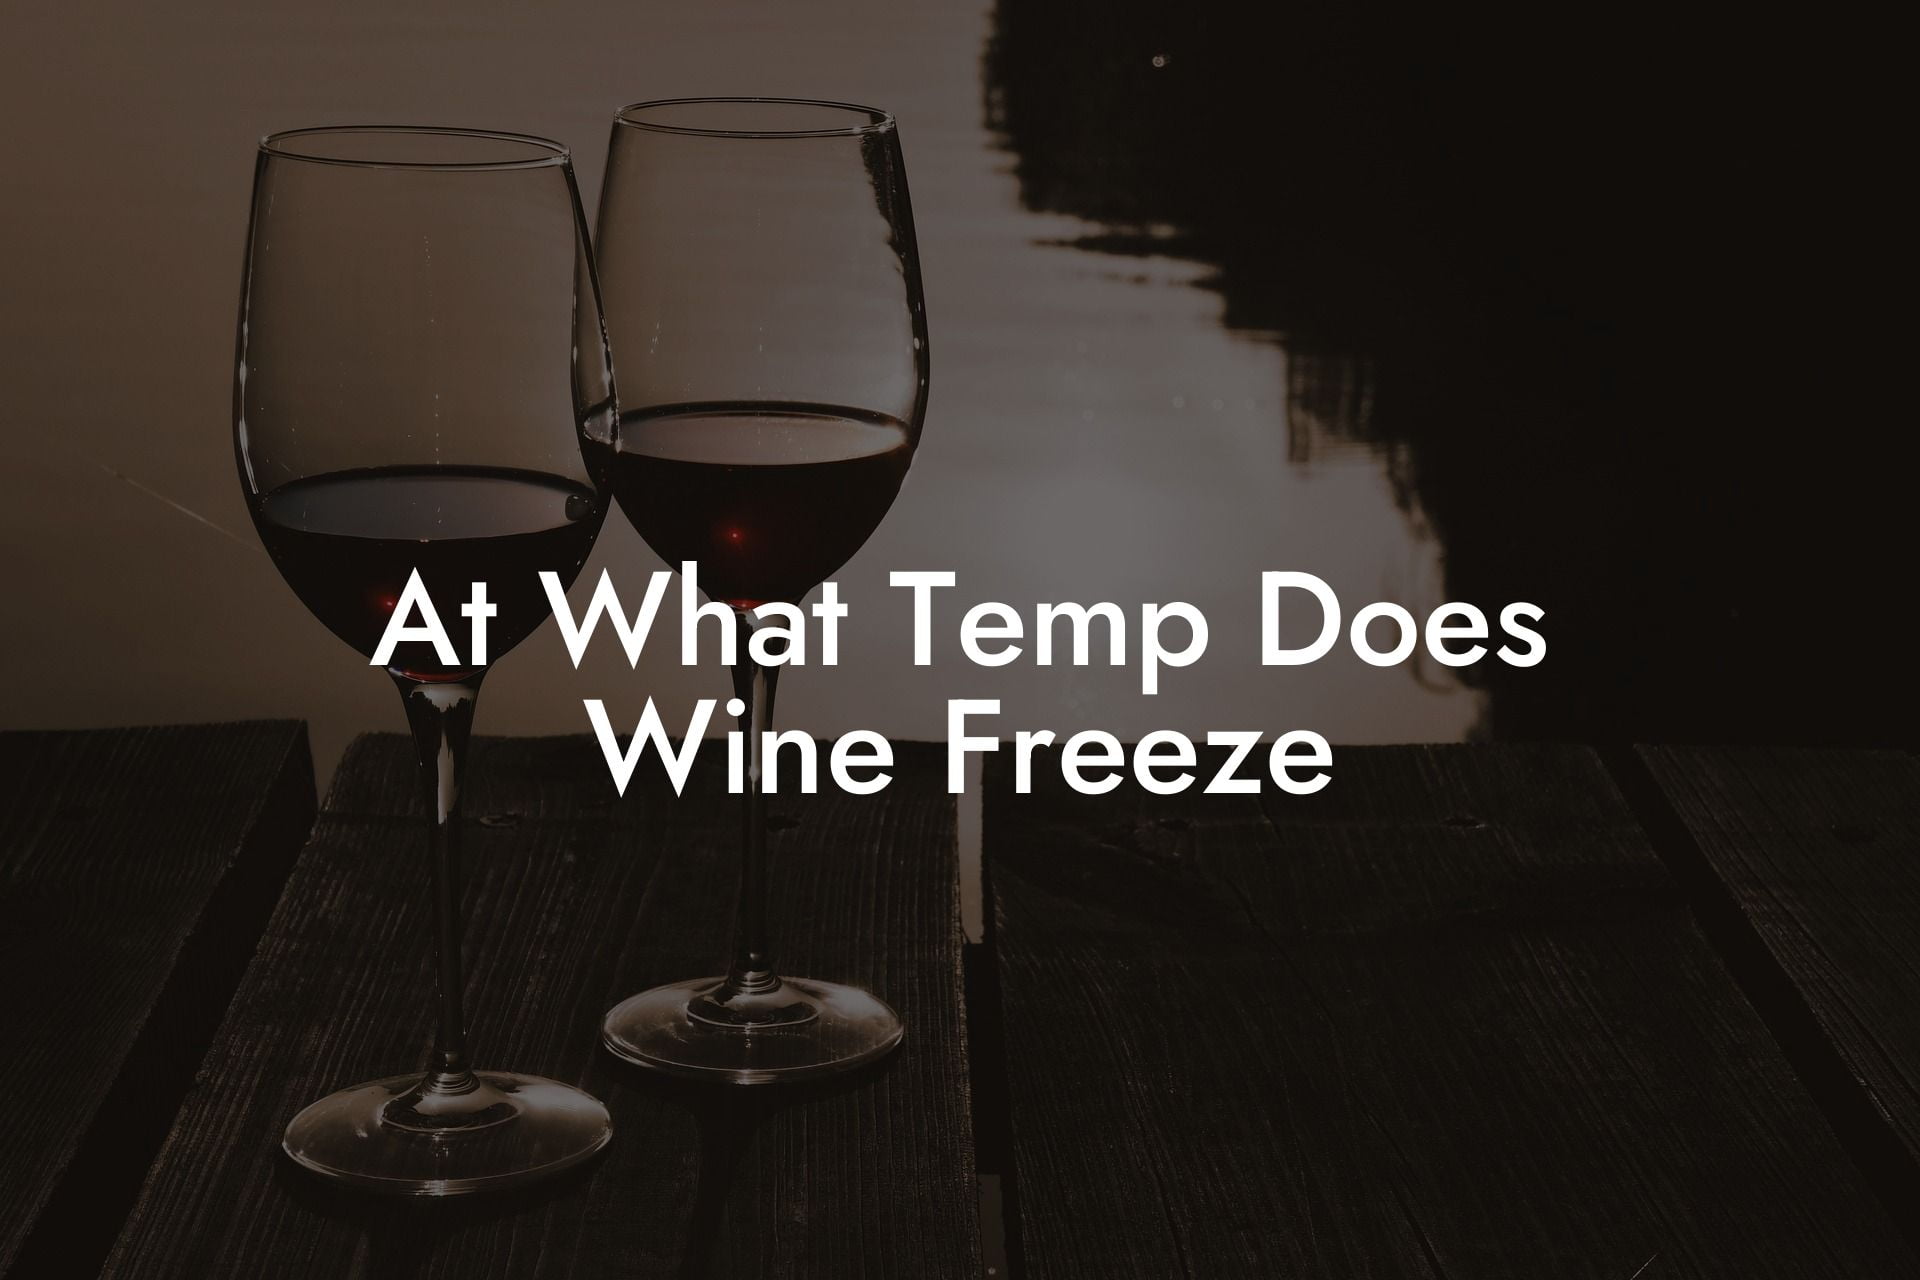 At What Temp Does Wine Freeze